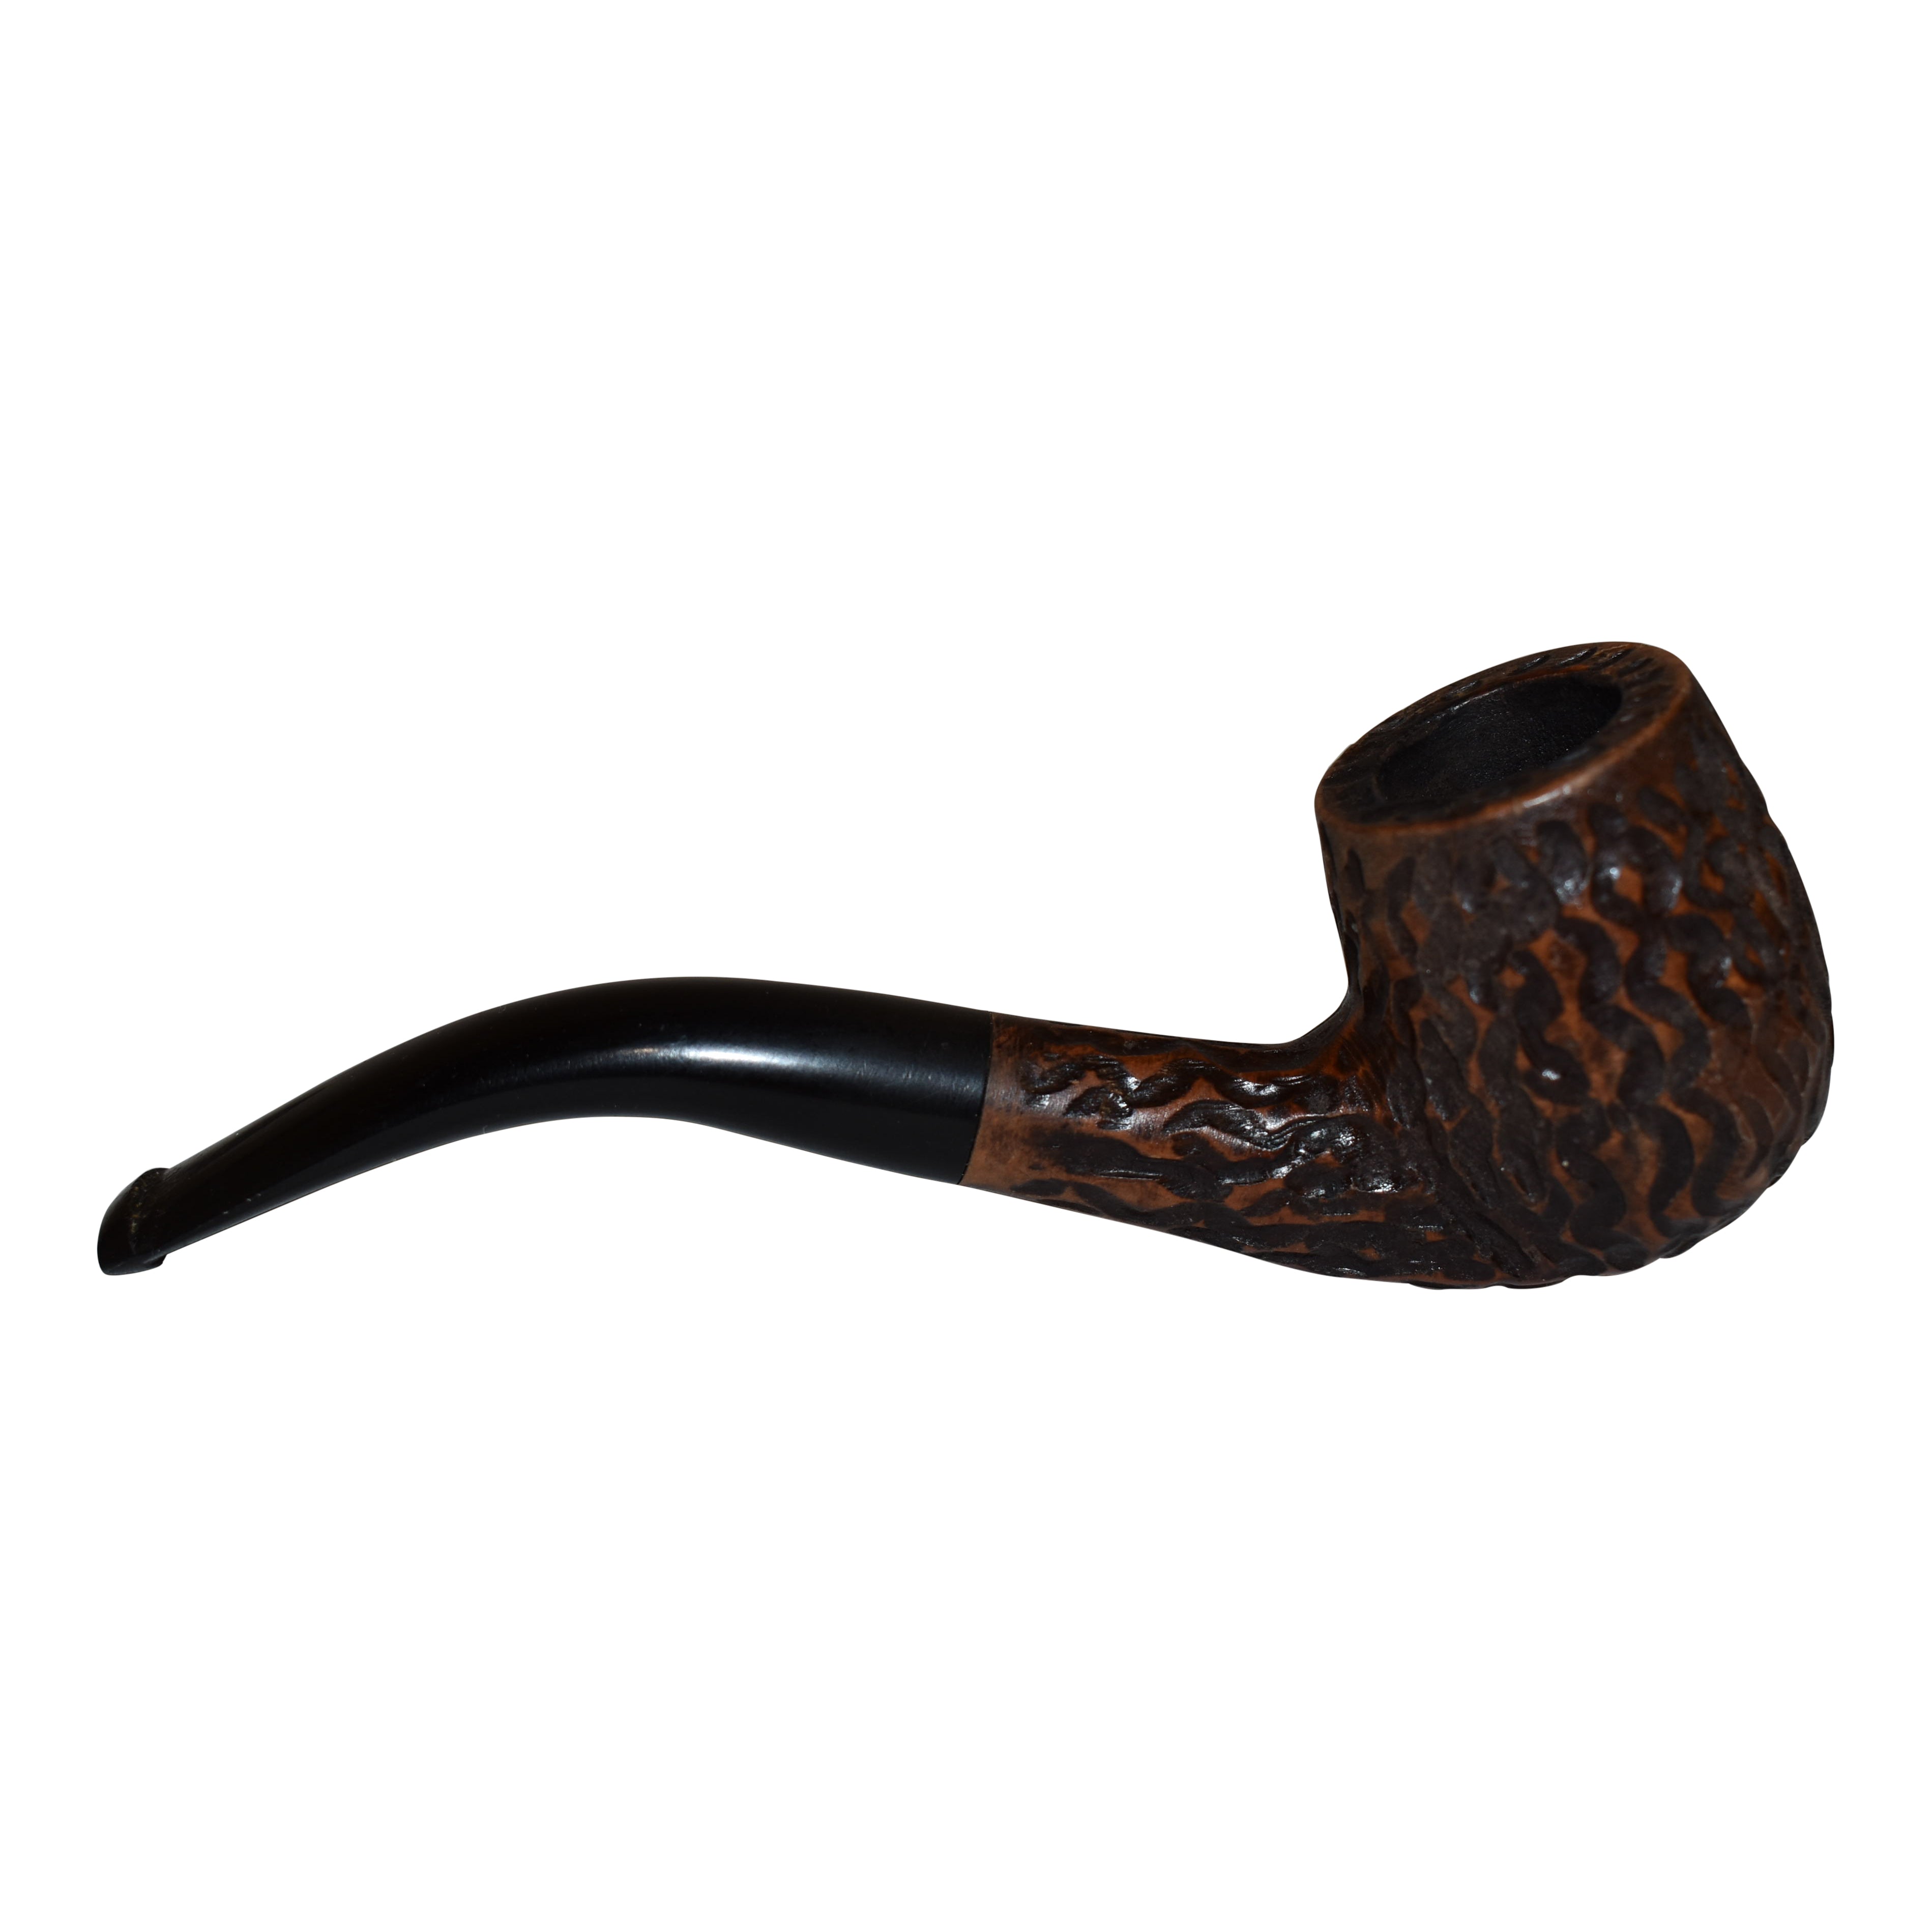 Textured Briar Wood Olaudy Tobacco Pipe